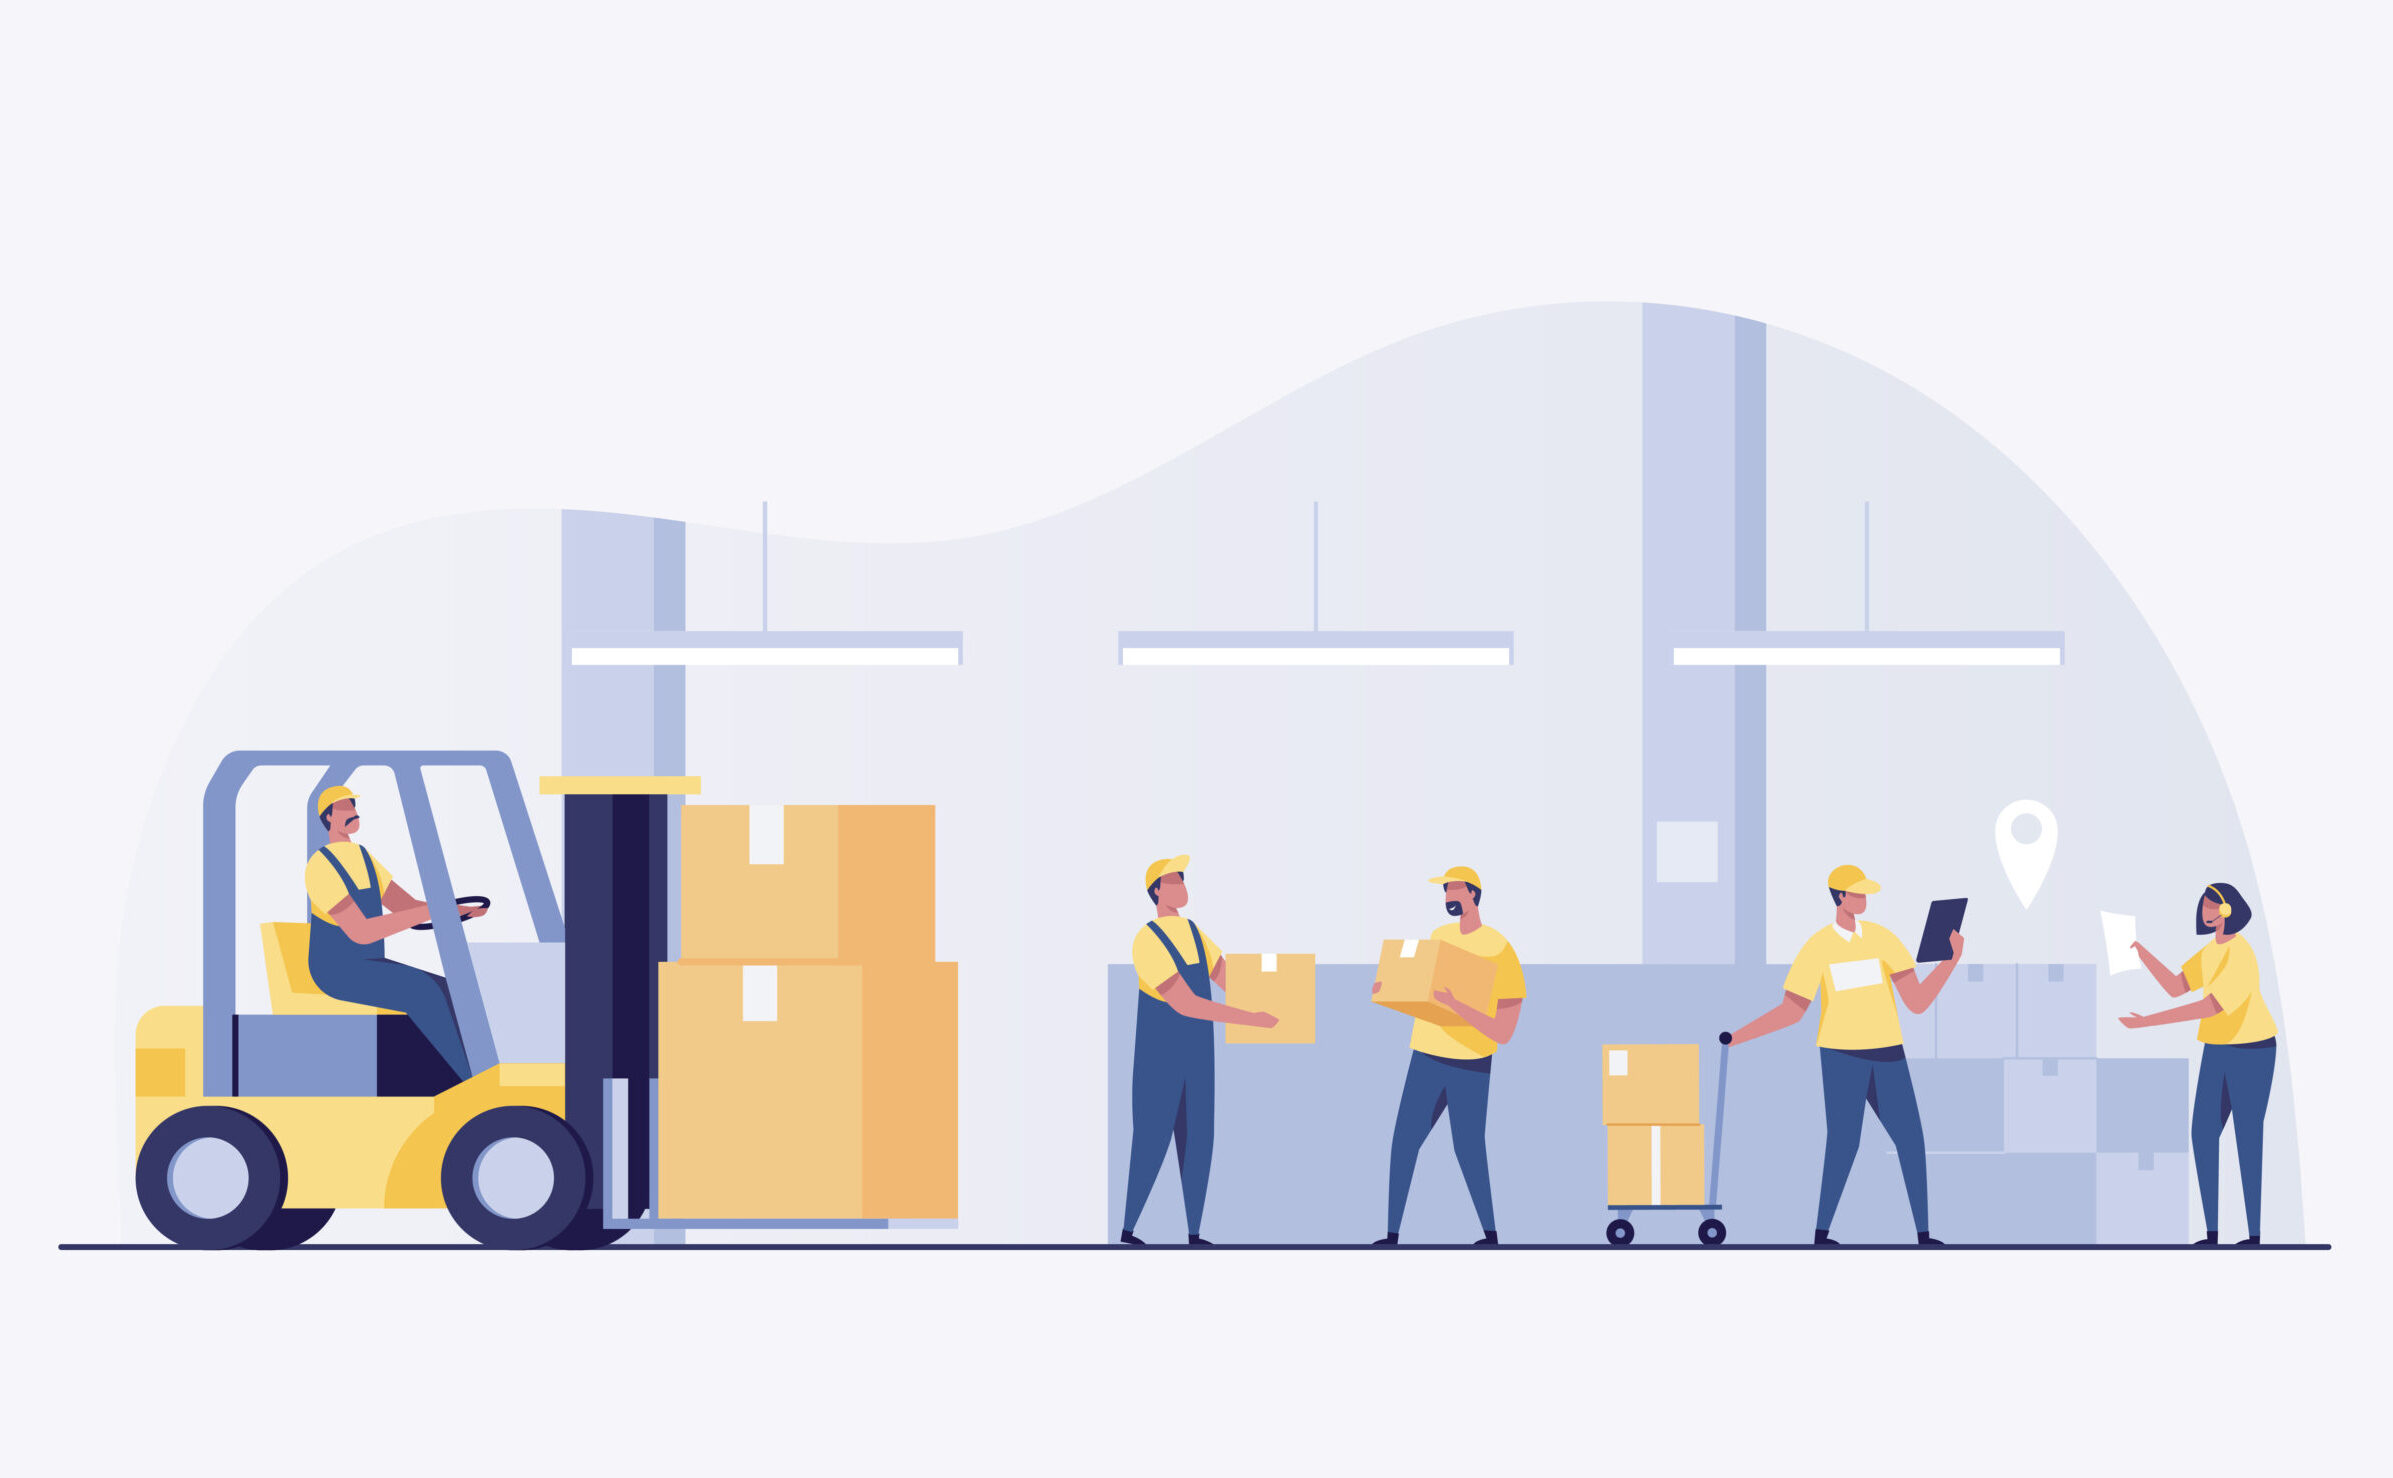 Warehouse Management System: Warehouse workers move boxes, check inventory and pick items for receiving, putaway, binning, picking, and counting.